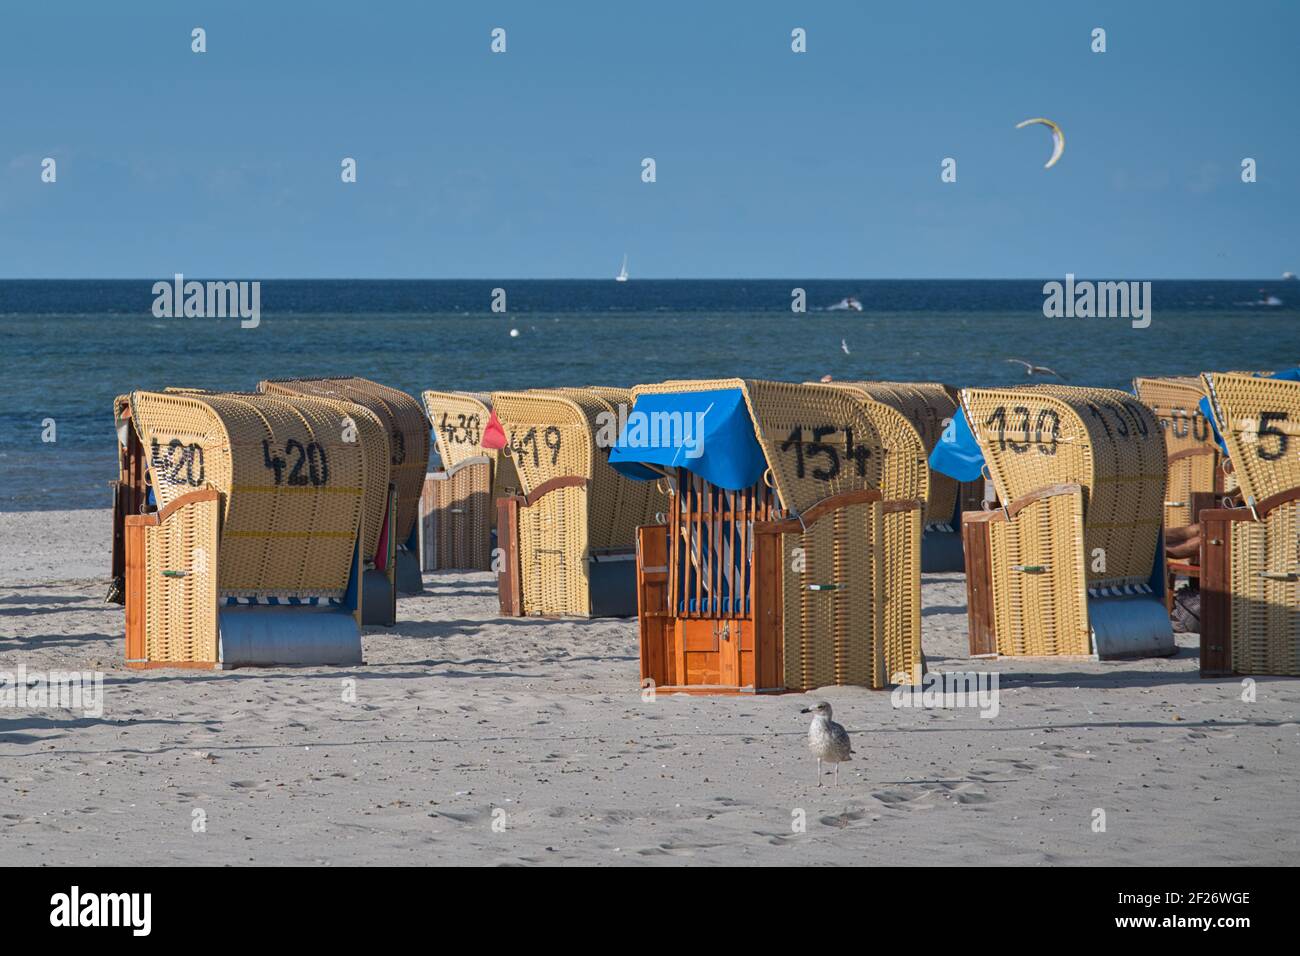 Sandy beach at the Sea with many beach baskets. Blue sky, ships on the horizon. A seagull runs in the foreground. Sandstrand am Meer mit Strandkörben. Stock Photo